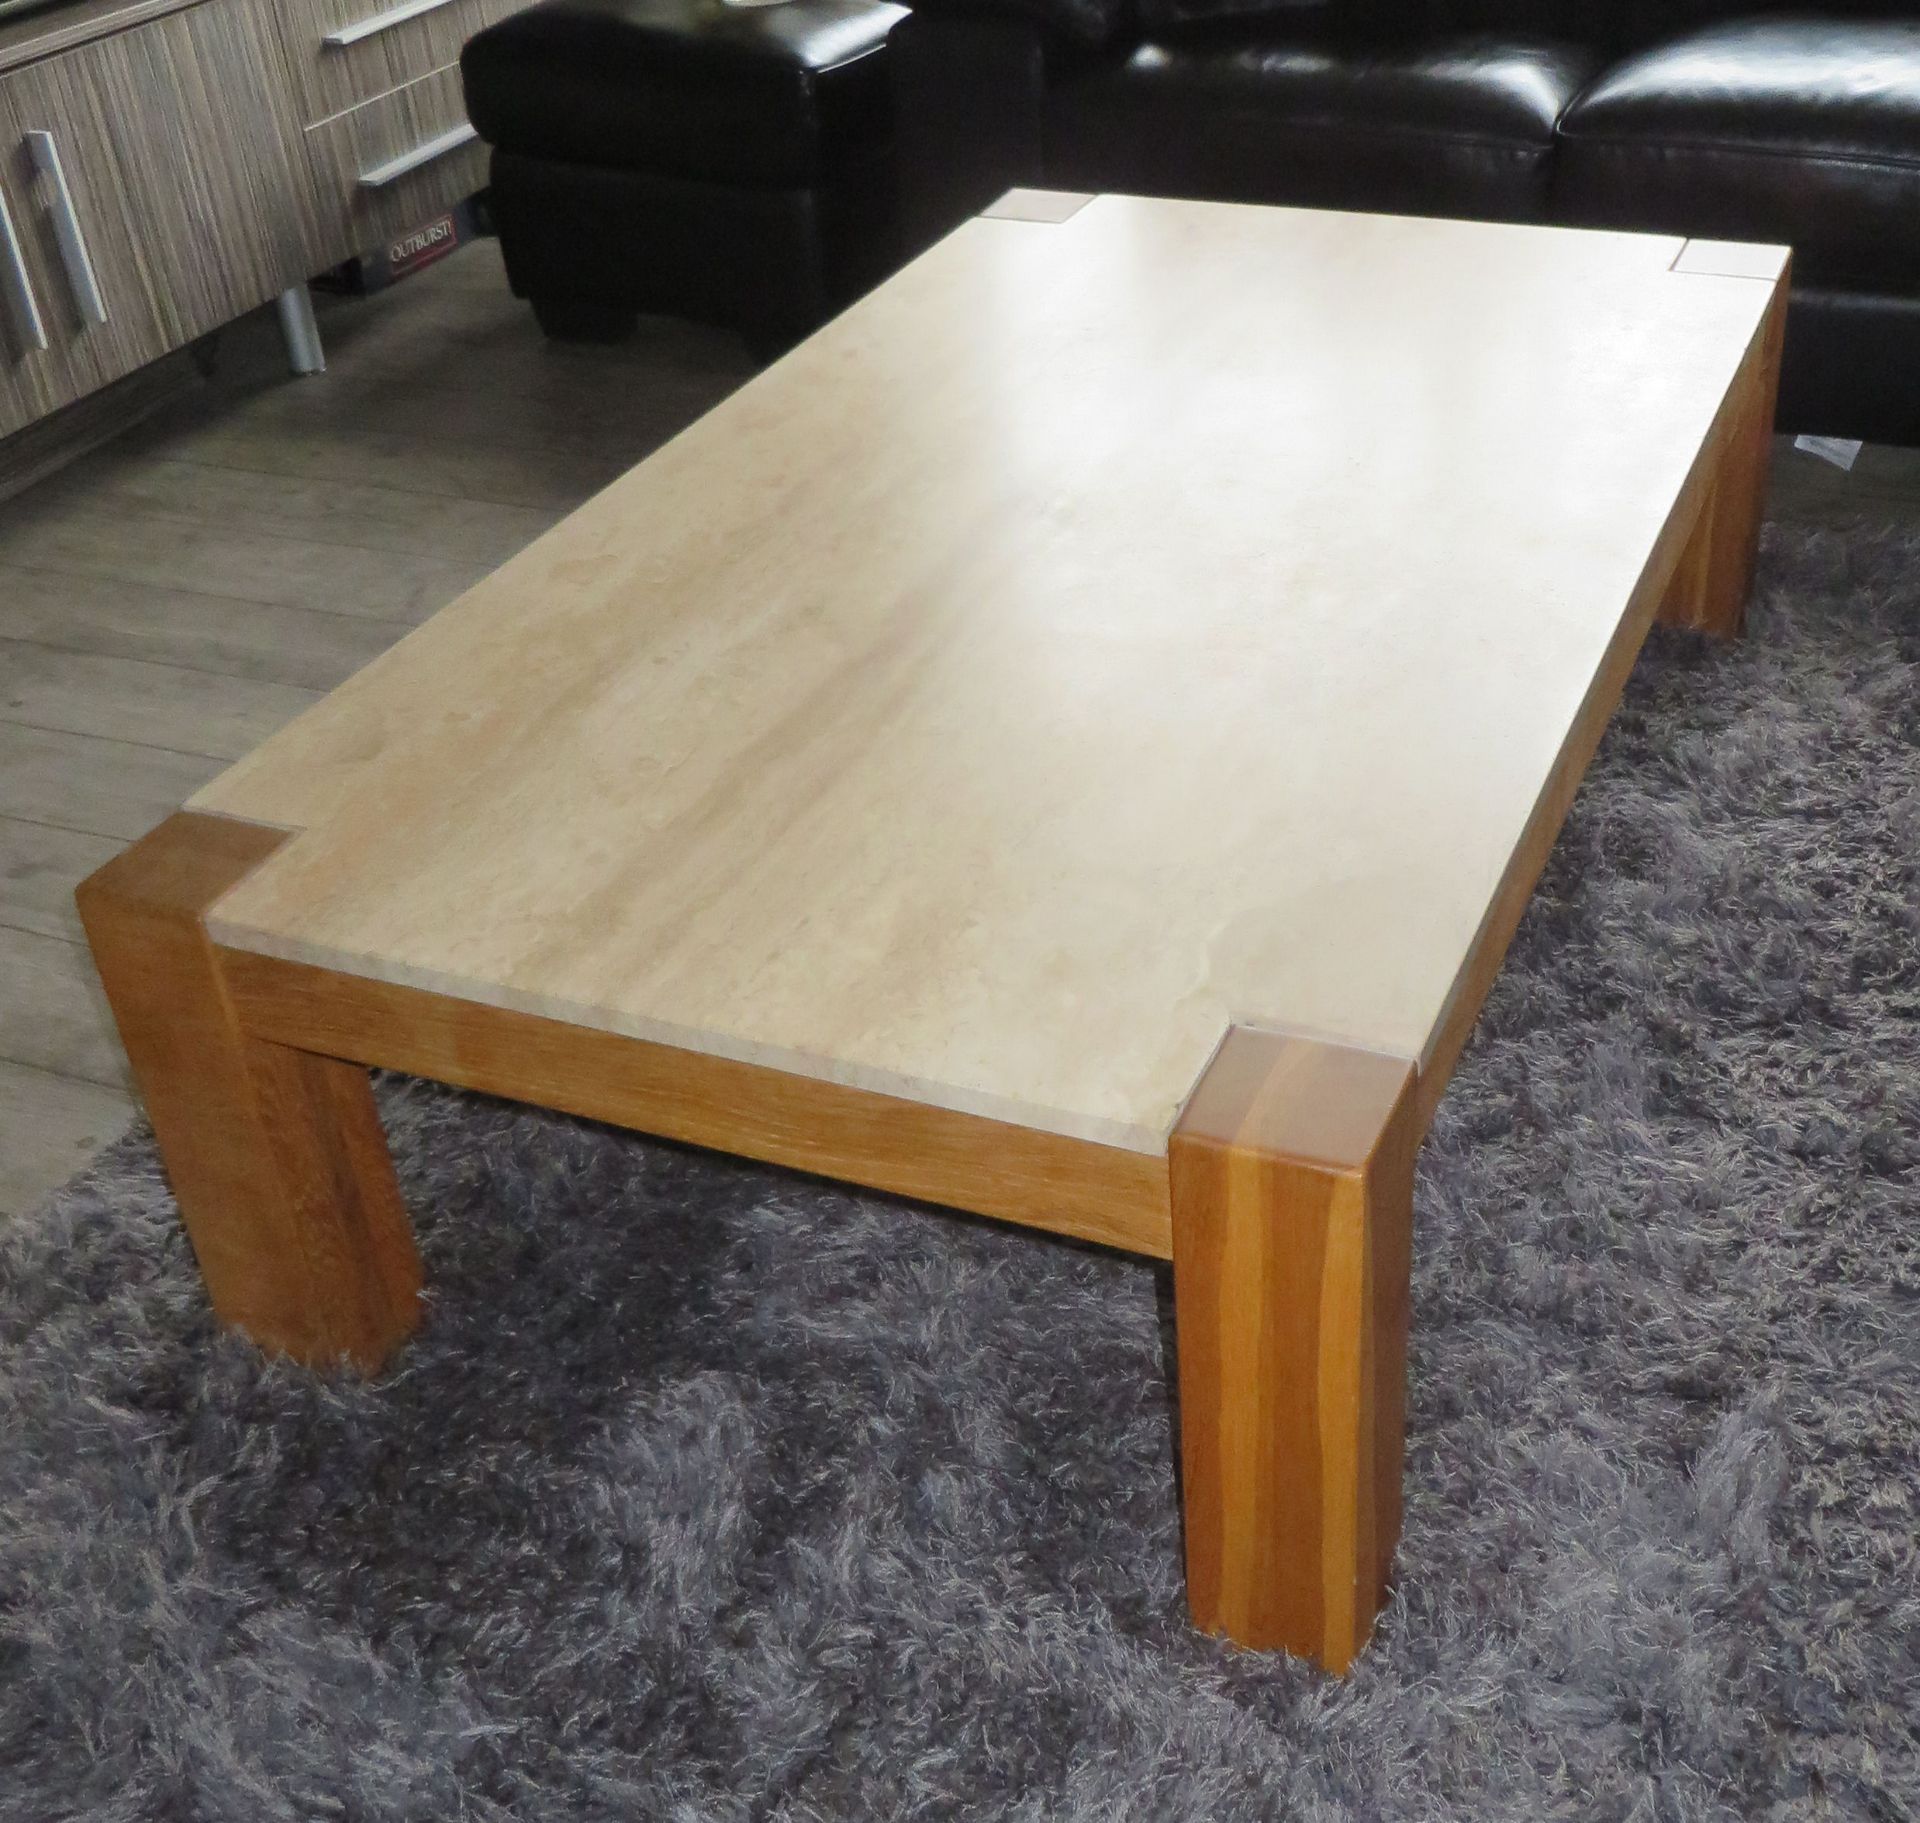 1 x Contemporary Oak and Travertine Coffee Table - CL175 - Location: Altrincham WA14 - NO VAT ON THE - Image 2 of 9